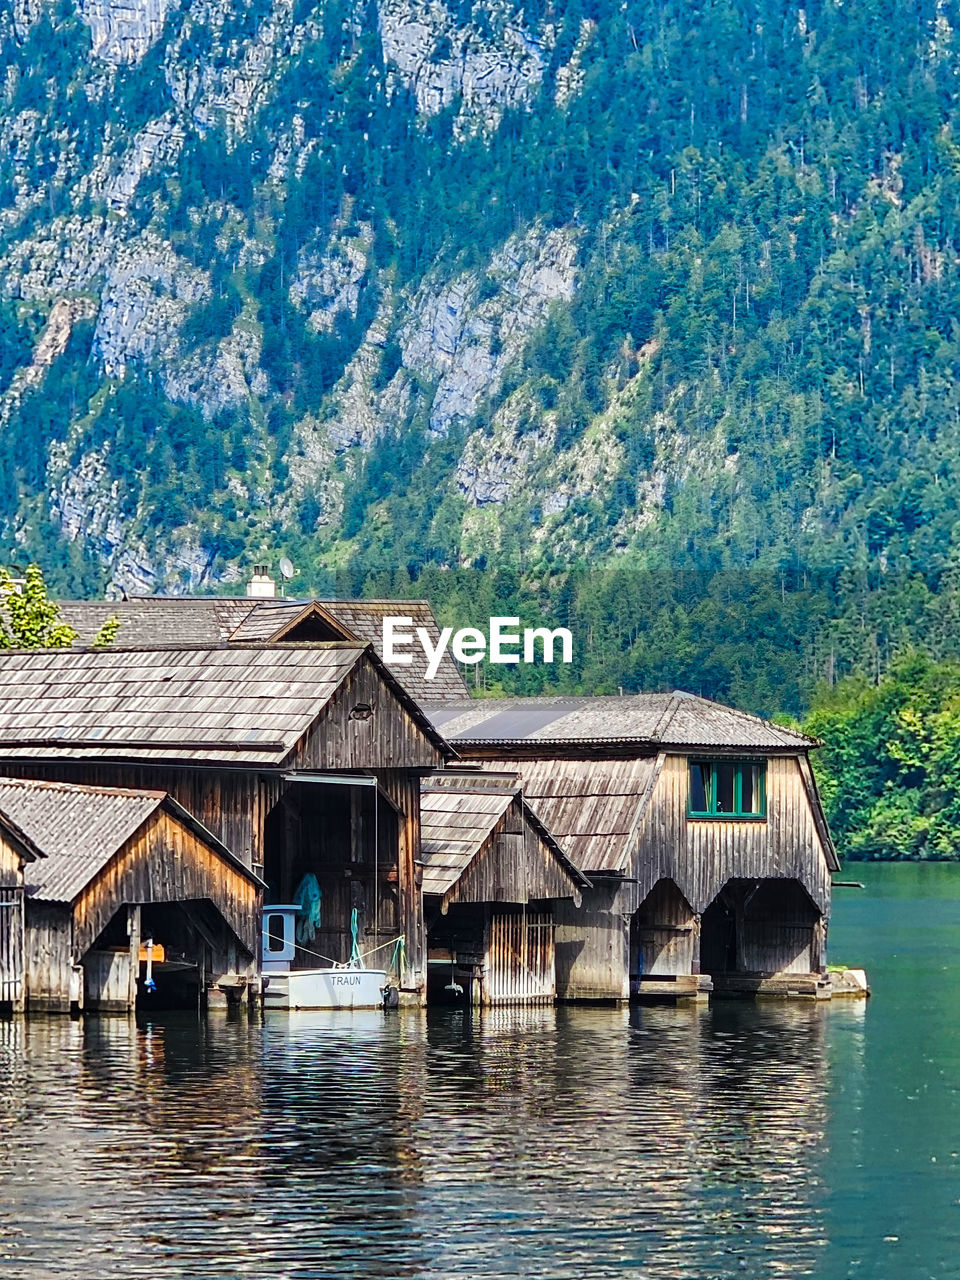 water, architecture, built structure, nature, building exterior, tree, house, plant, building, river, no people, stilt house, day, beauty in nature, hut, waterfront, wood, residential district, scenics - nature, outdoors, tranquility, landscape, travel destinations, boathouse, environment, tranquil scene